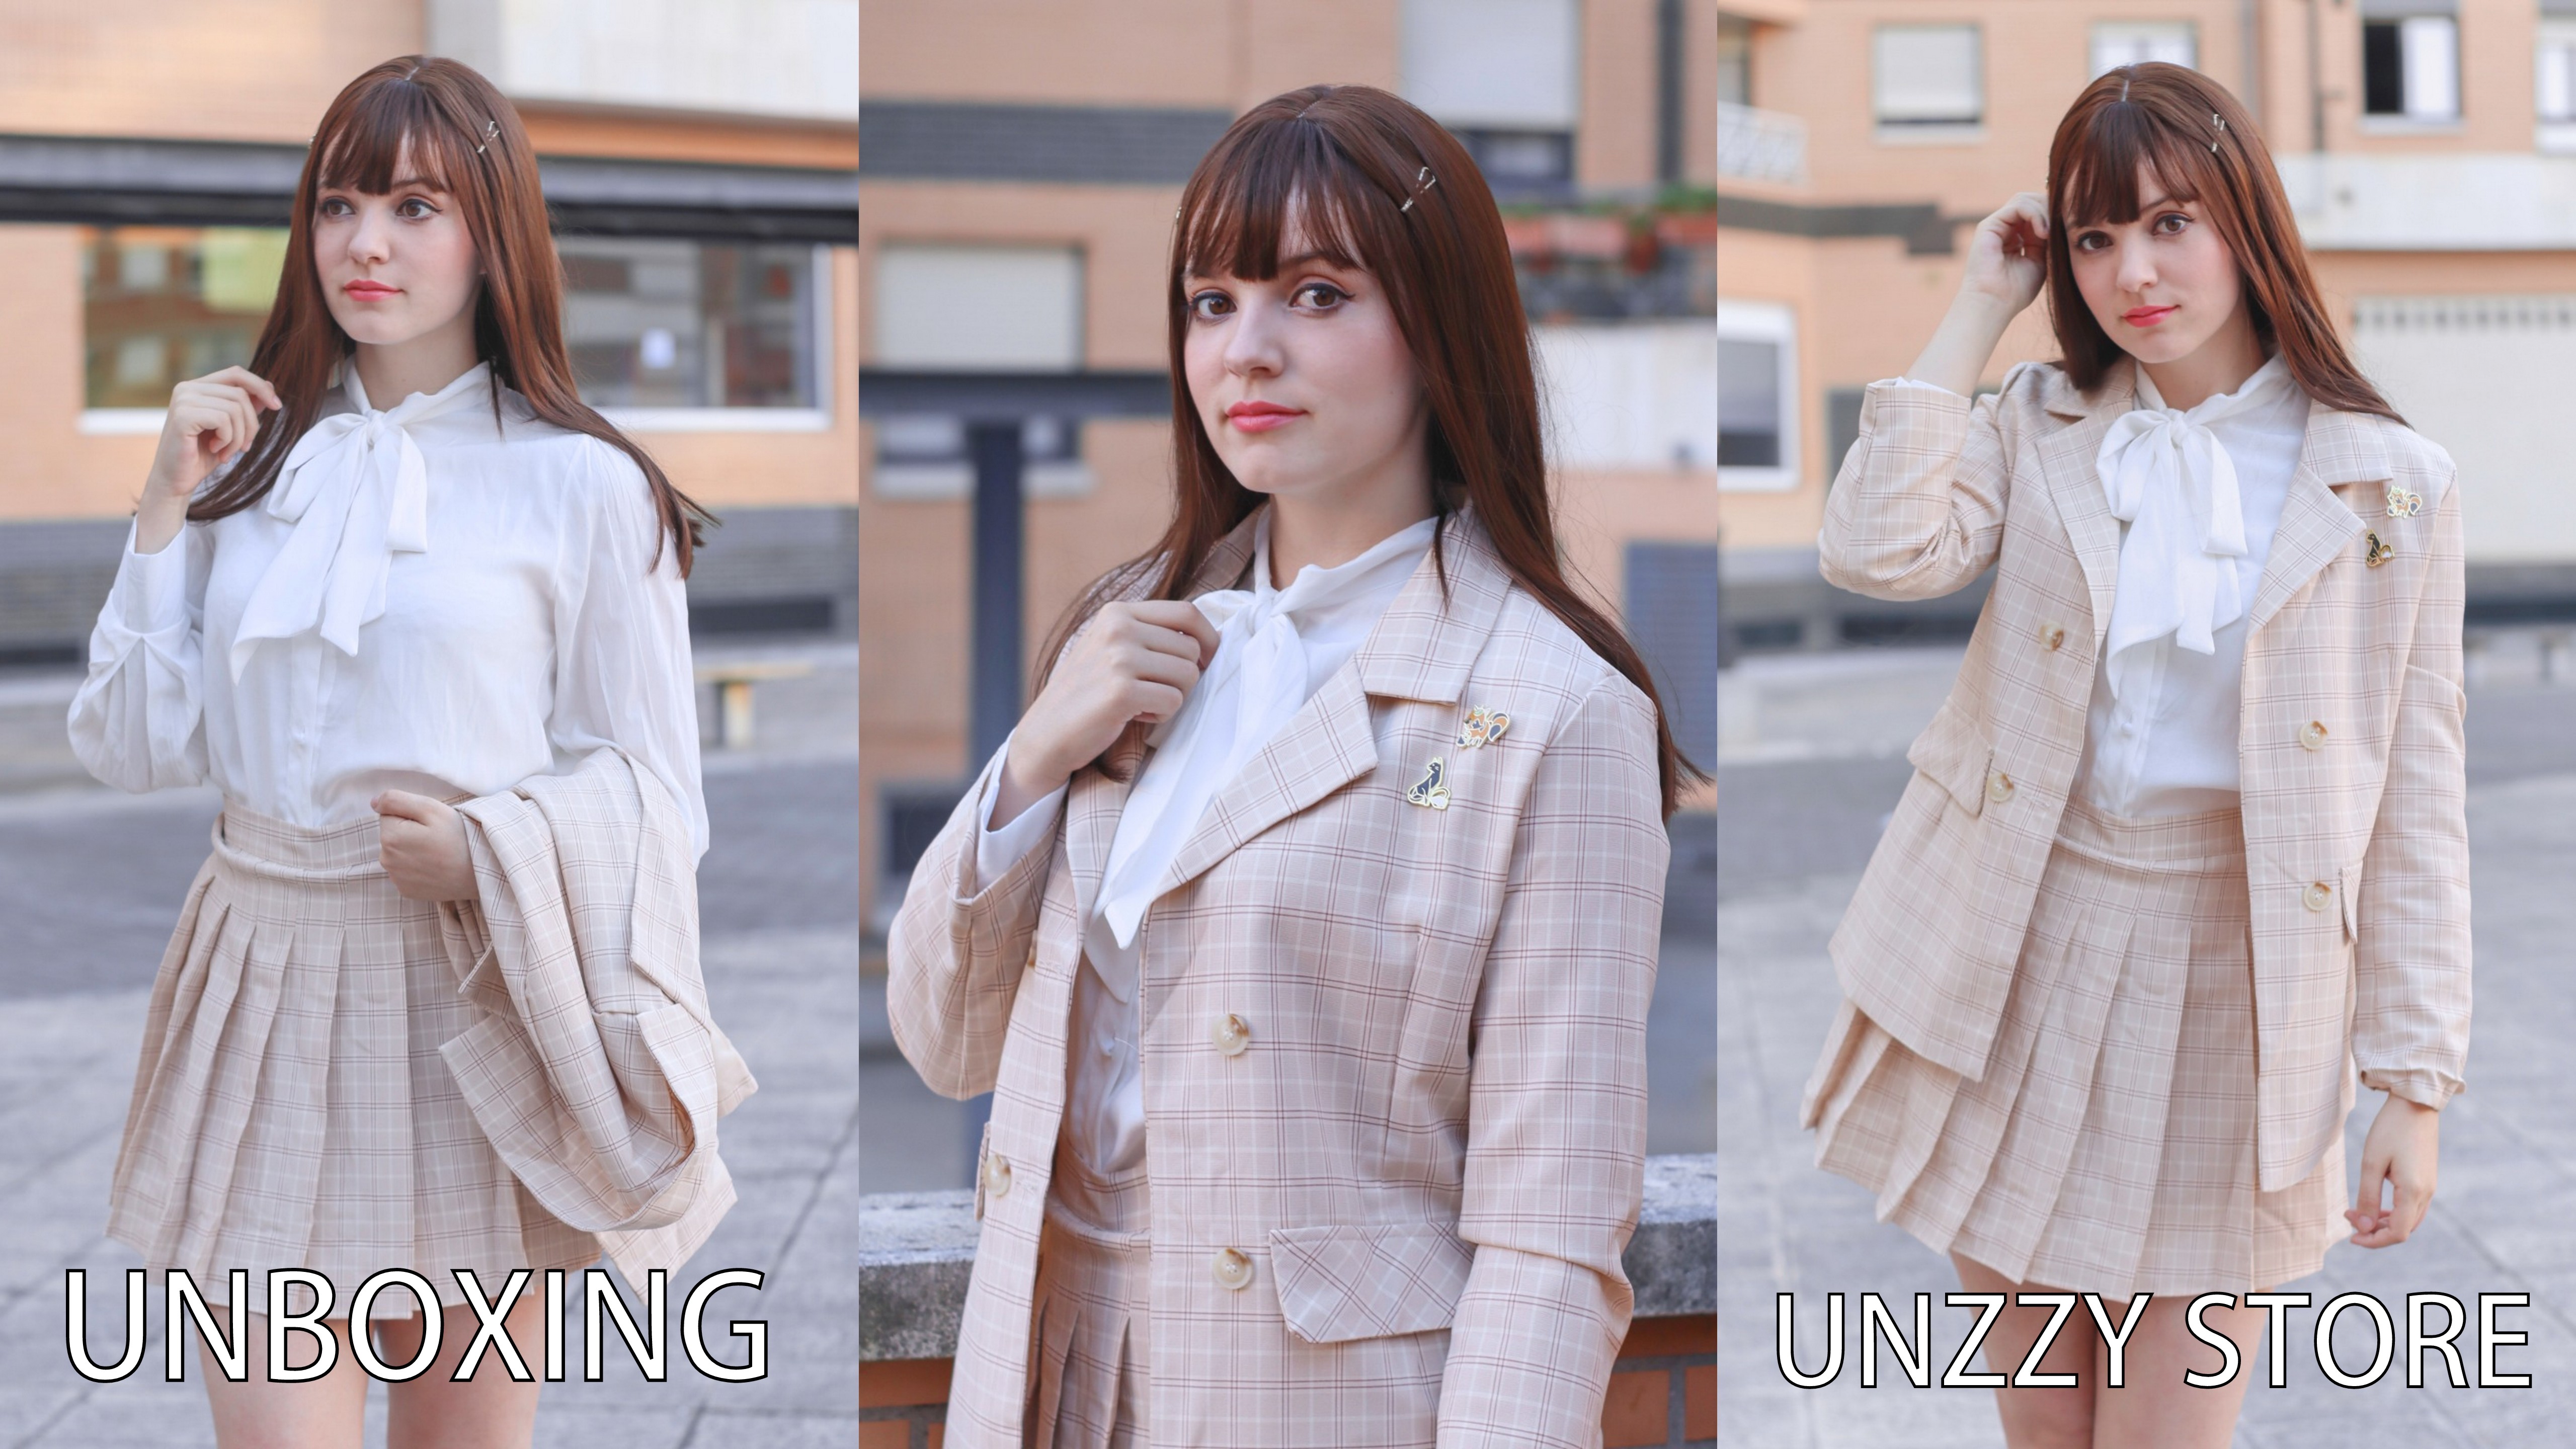 Fashion Unboxing: clothes & wig from Unzzy Store